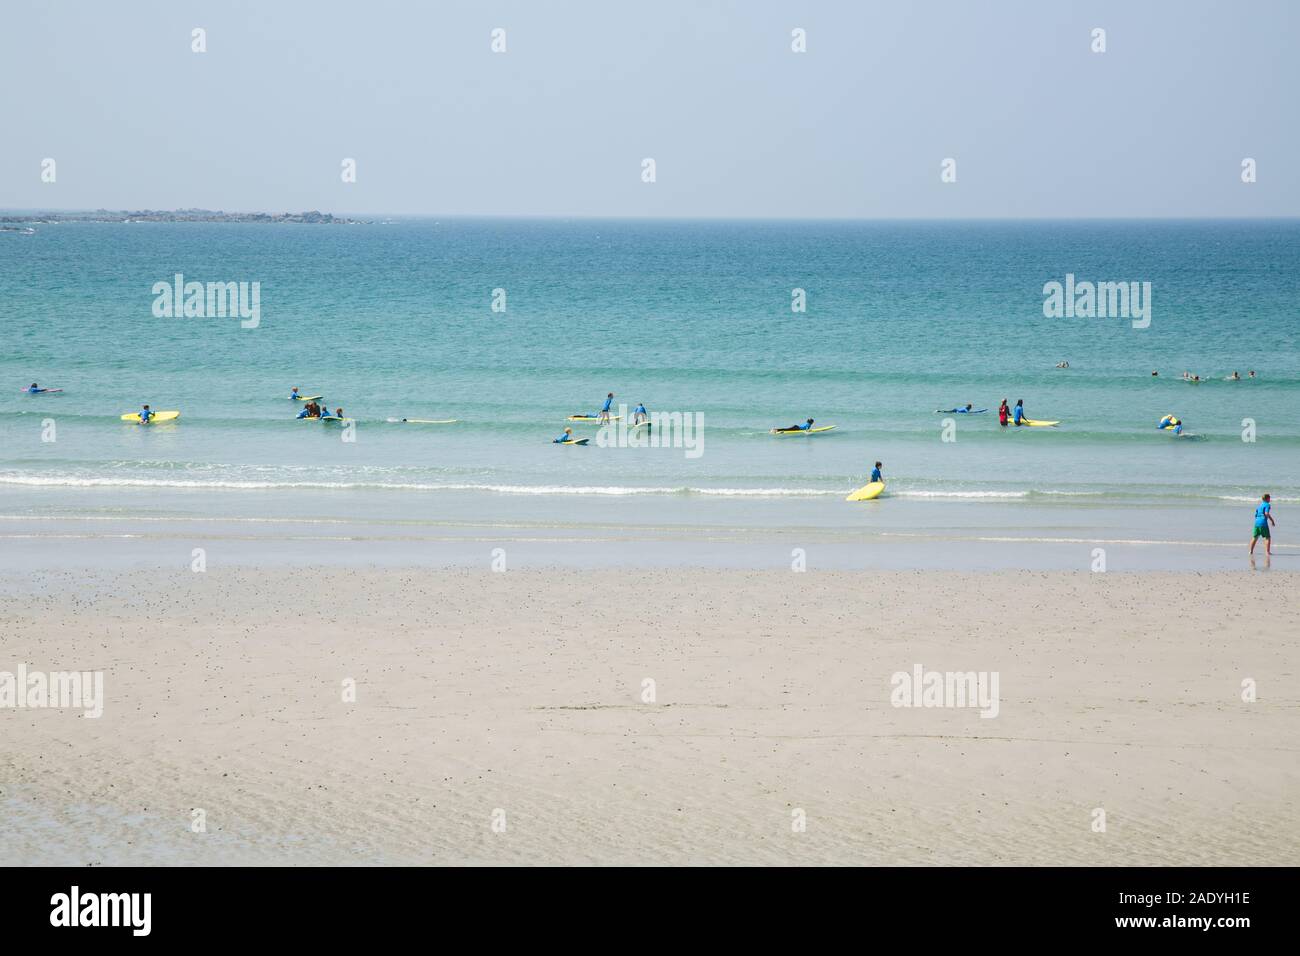 Surfers learning to Surf in surfing school, Guernsey, Channel Islands Stock Photo